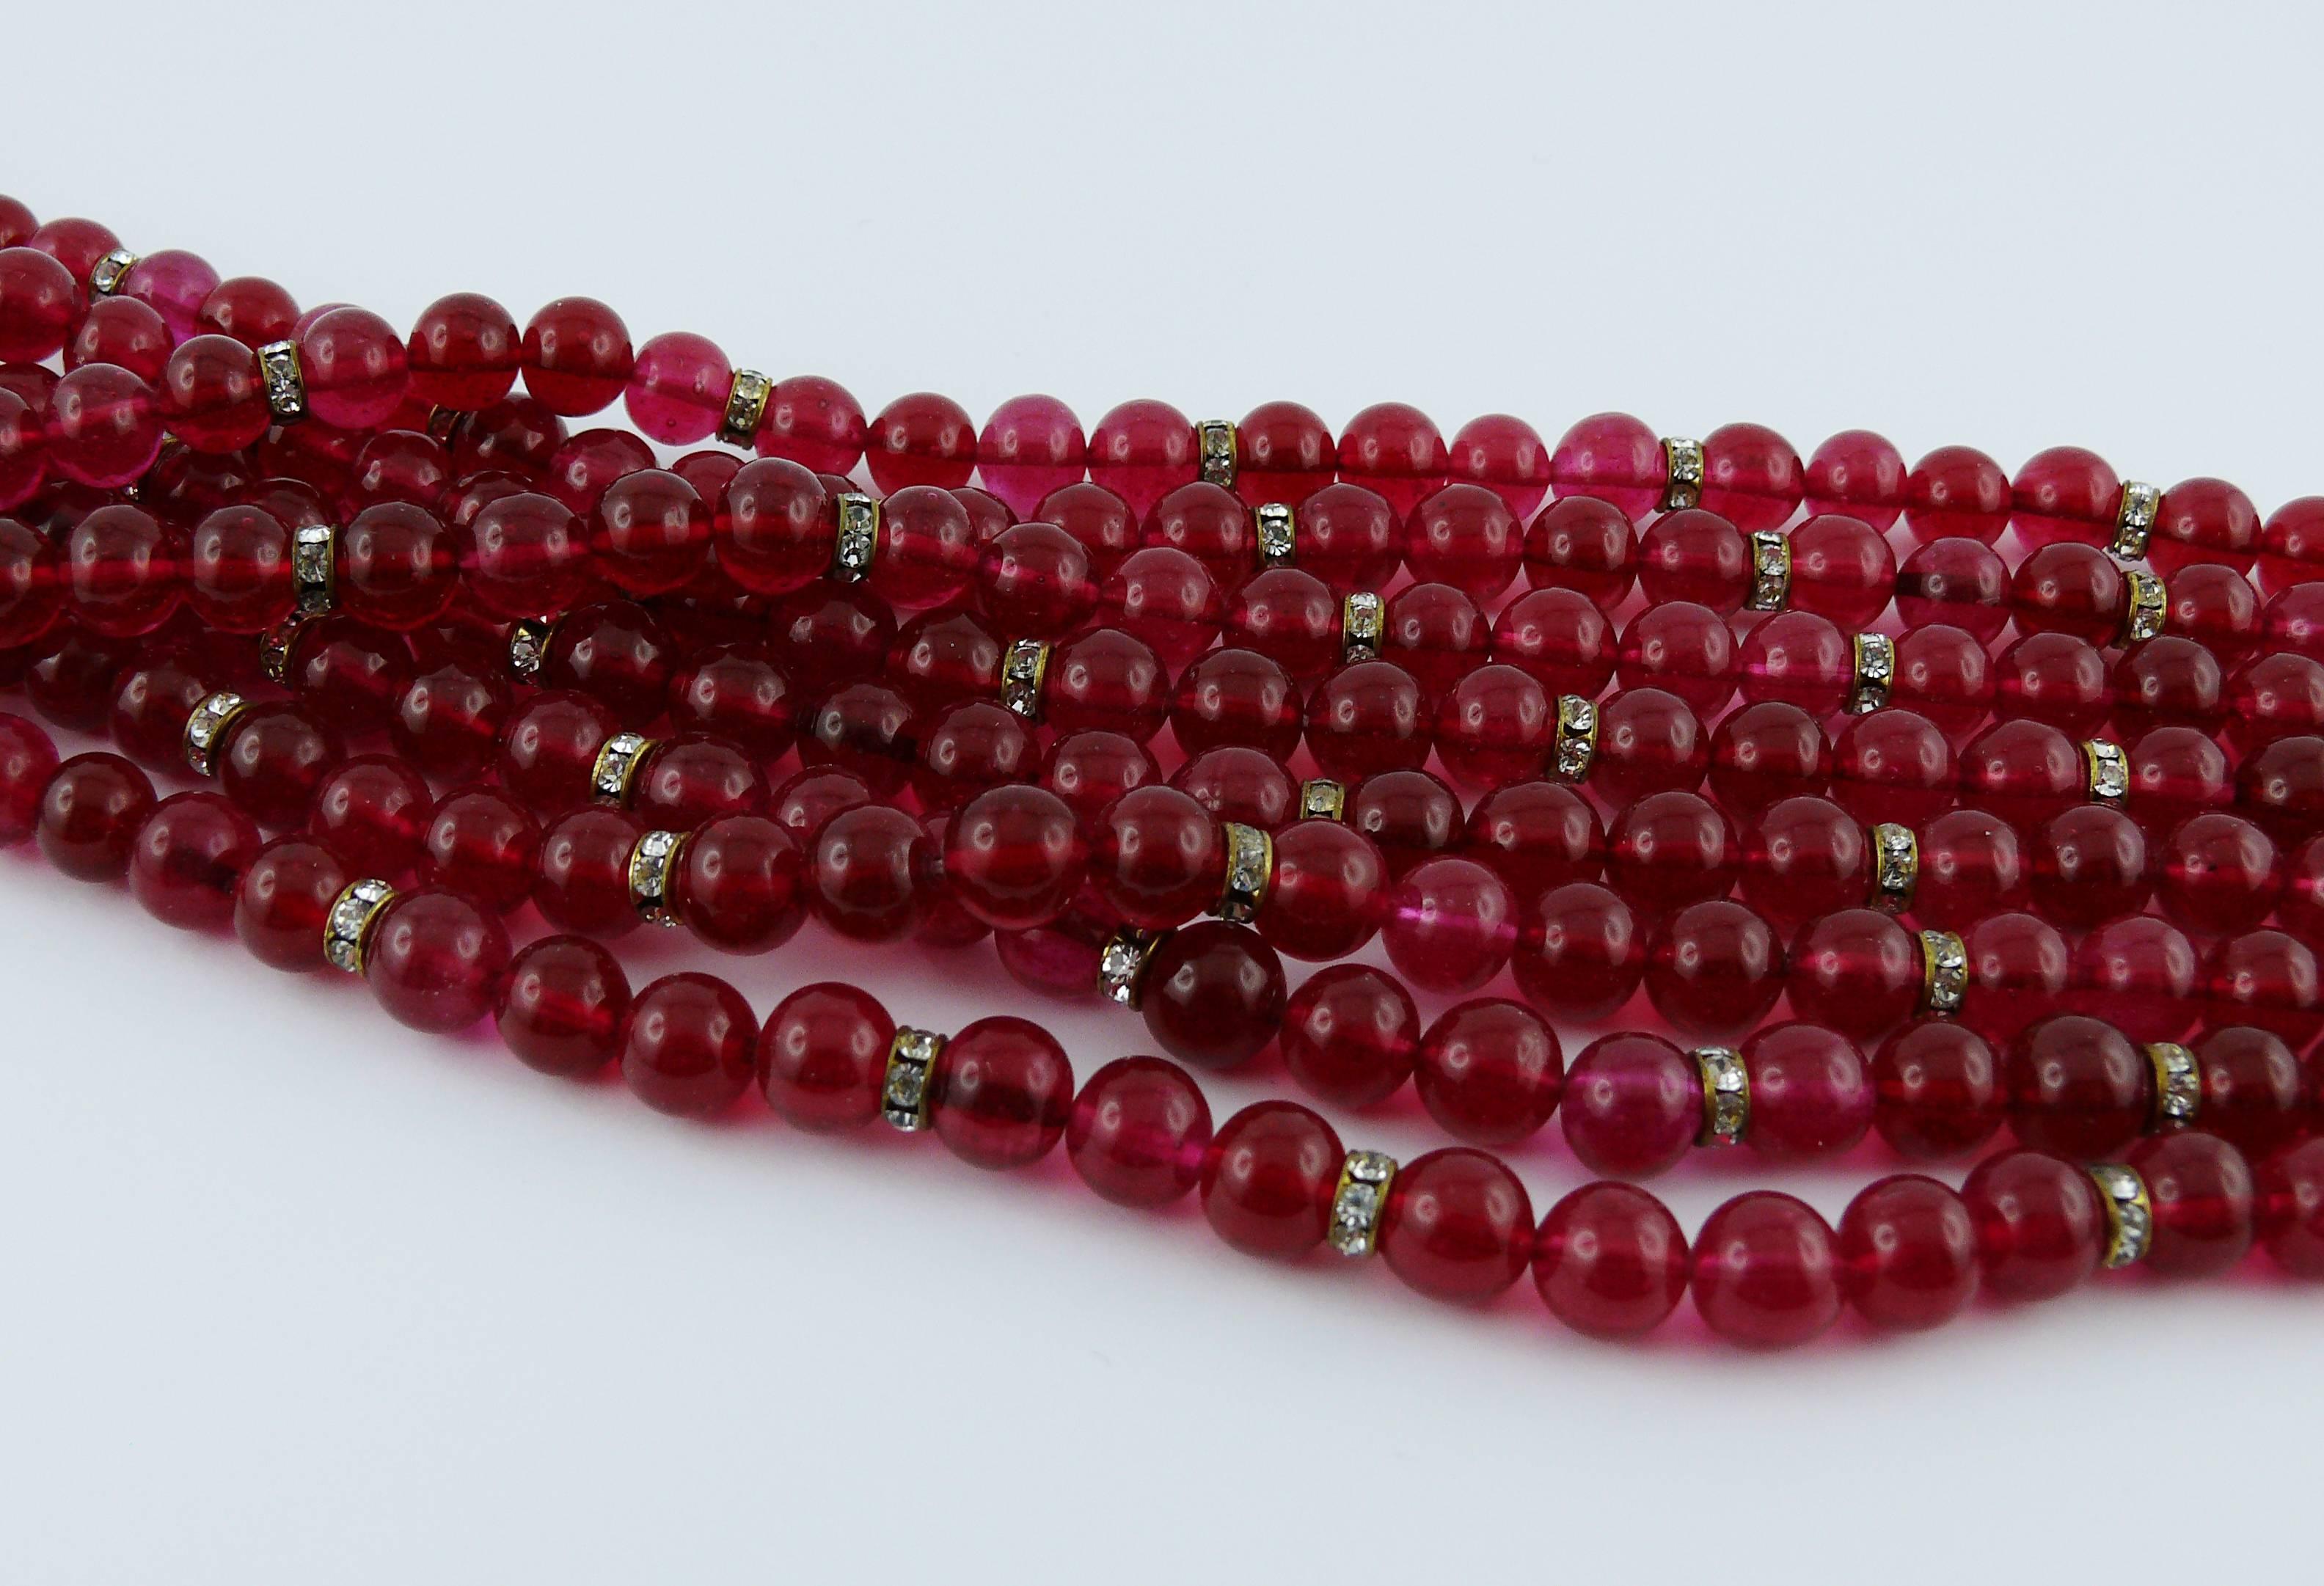 Women's Chanel Vintage 1970s Multi-Strand Ruby Glass Necklace